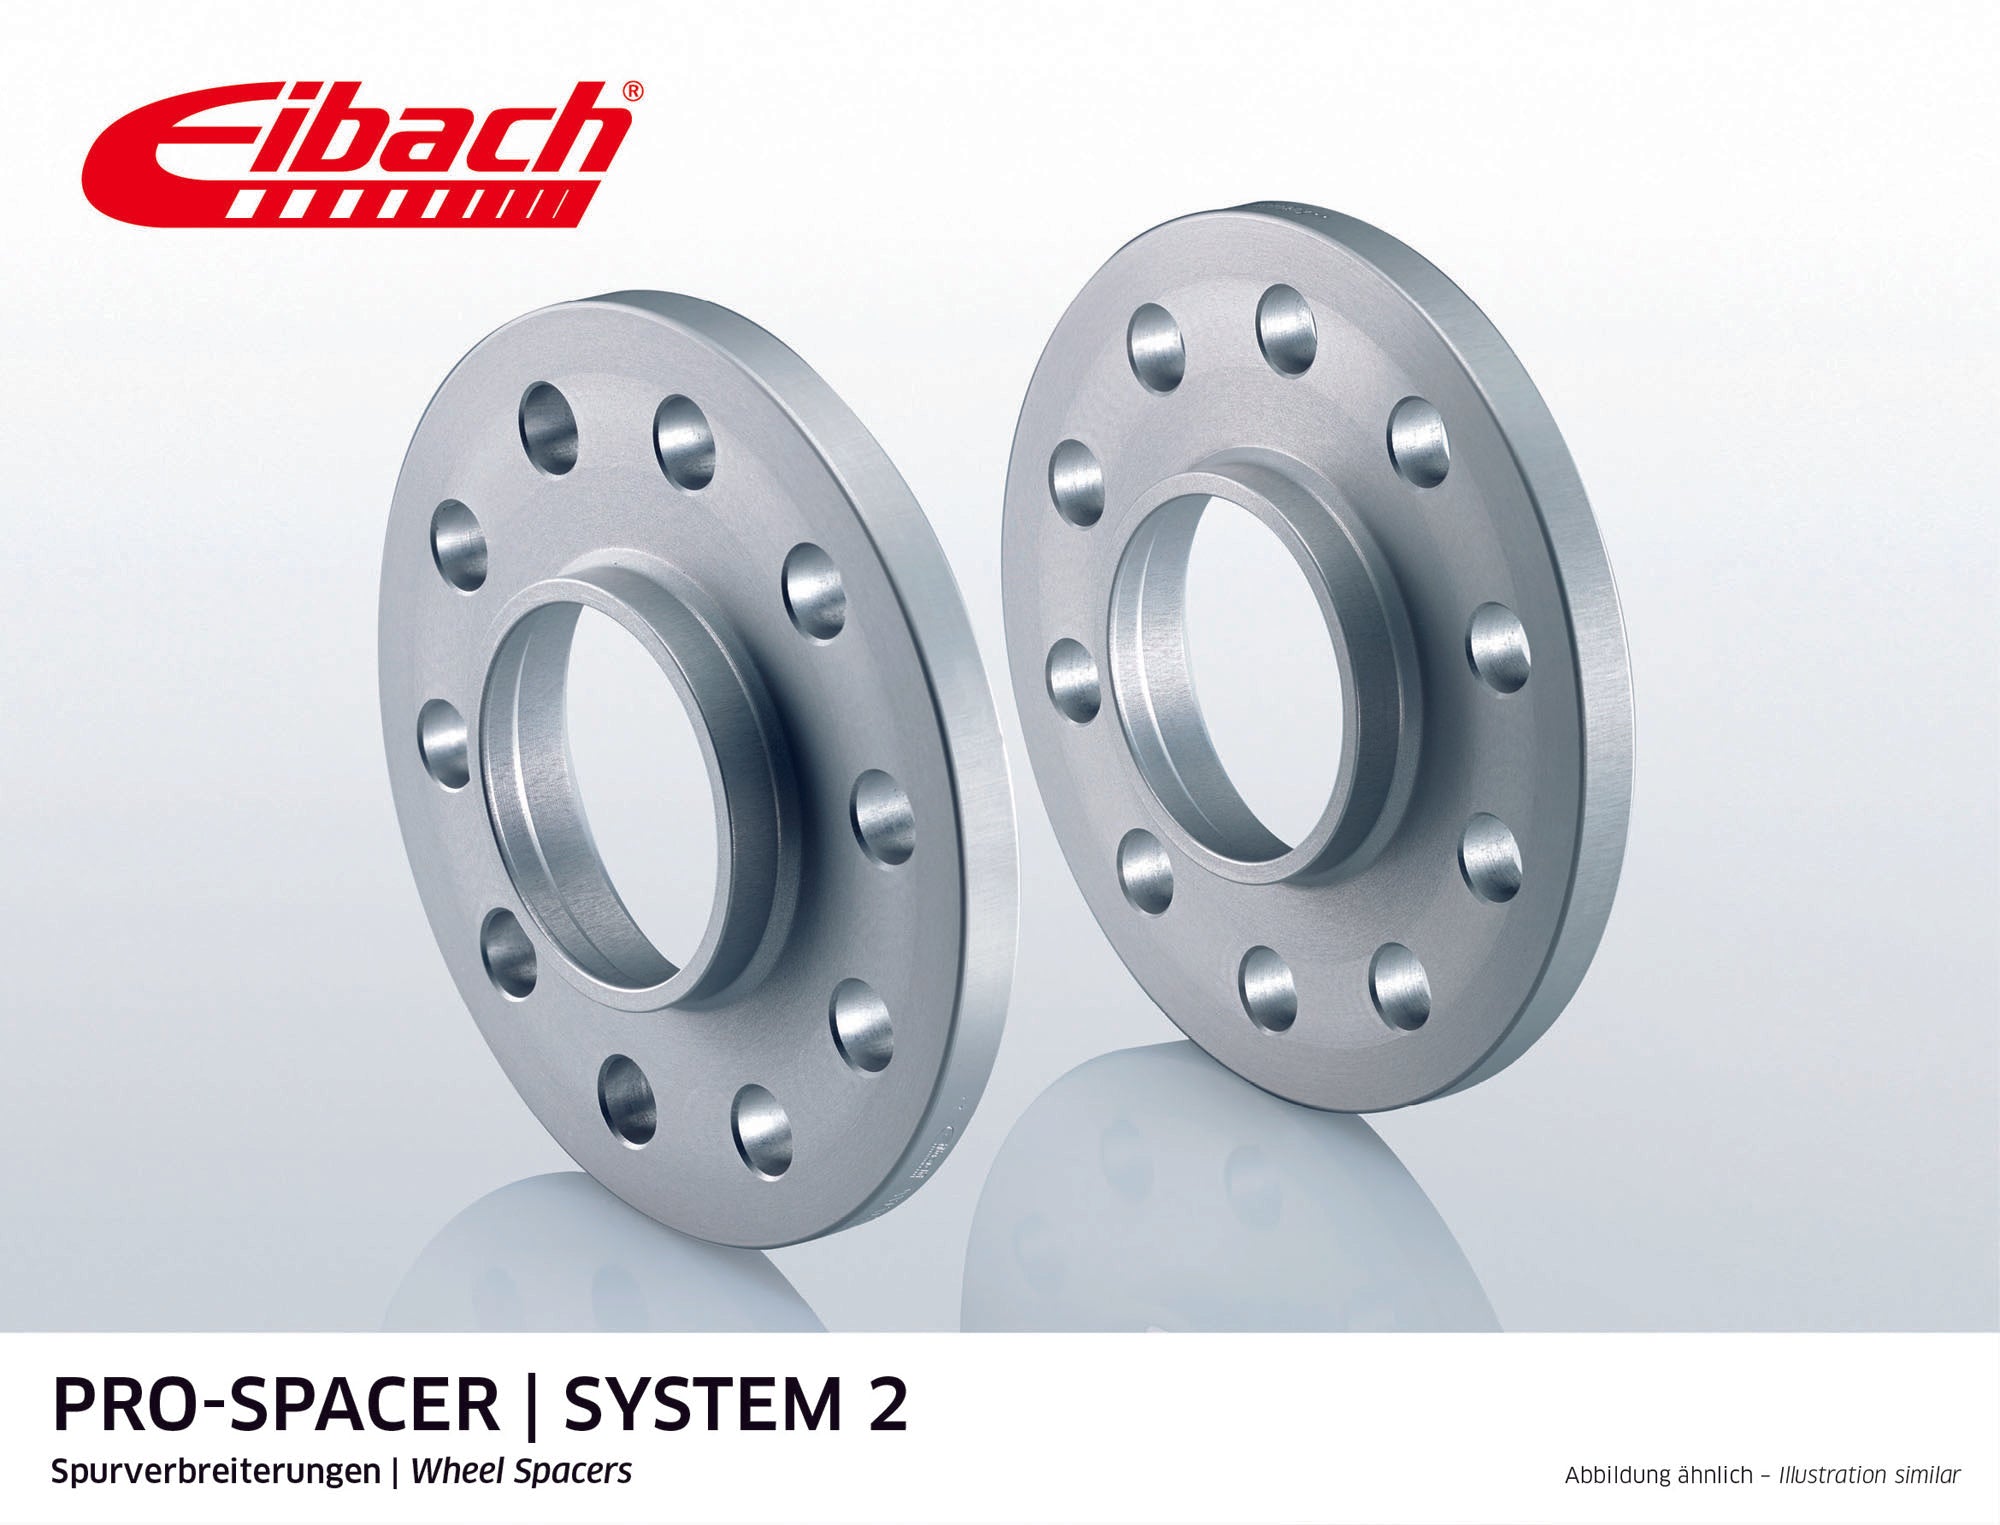 Eibach 15mm Pro-Spacer - Silver Anodized Wheel Spacer CAYMAN 2005-12 #S90-2-15-018